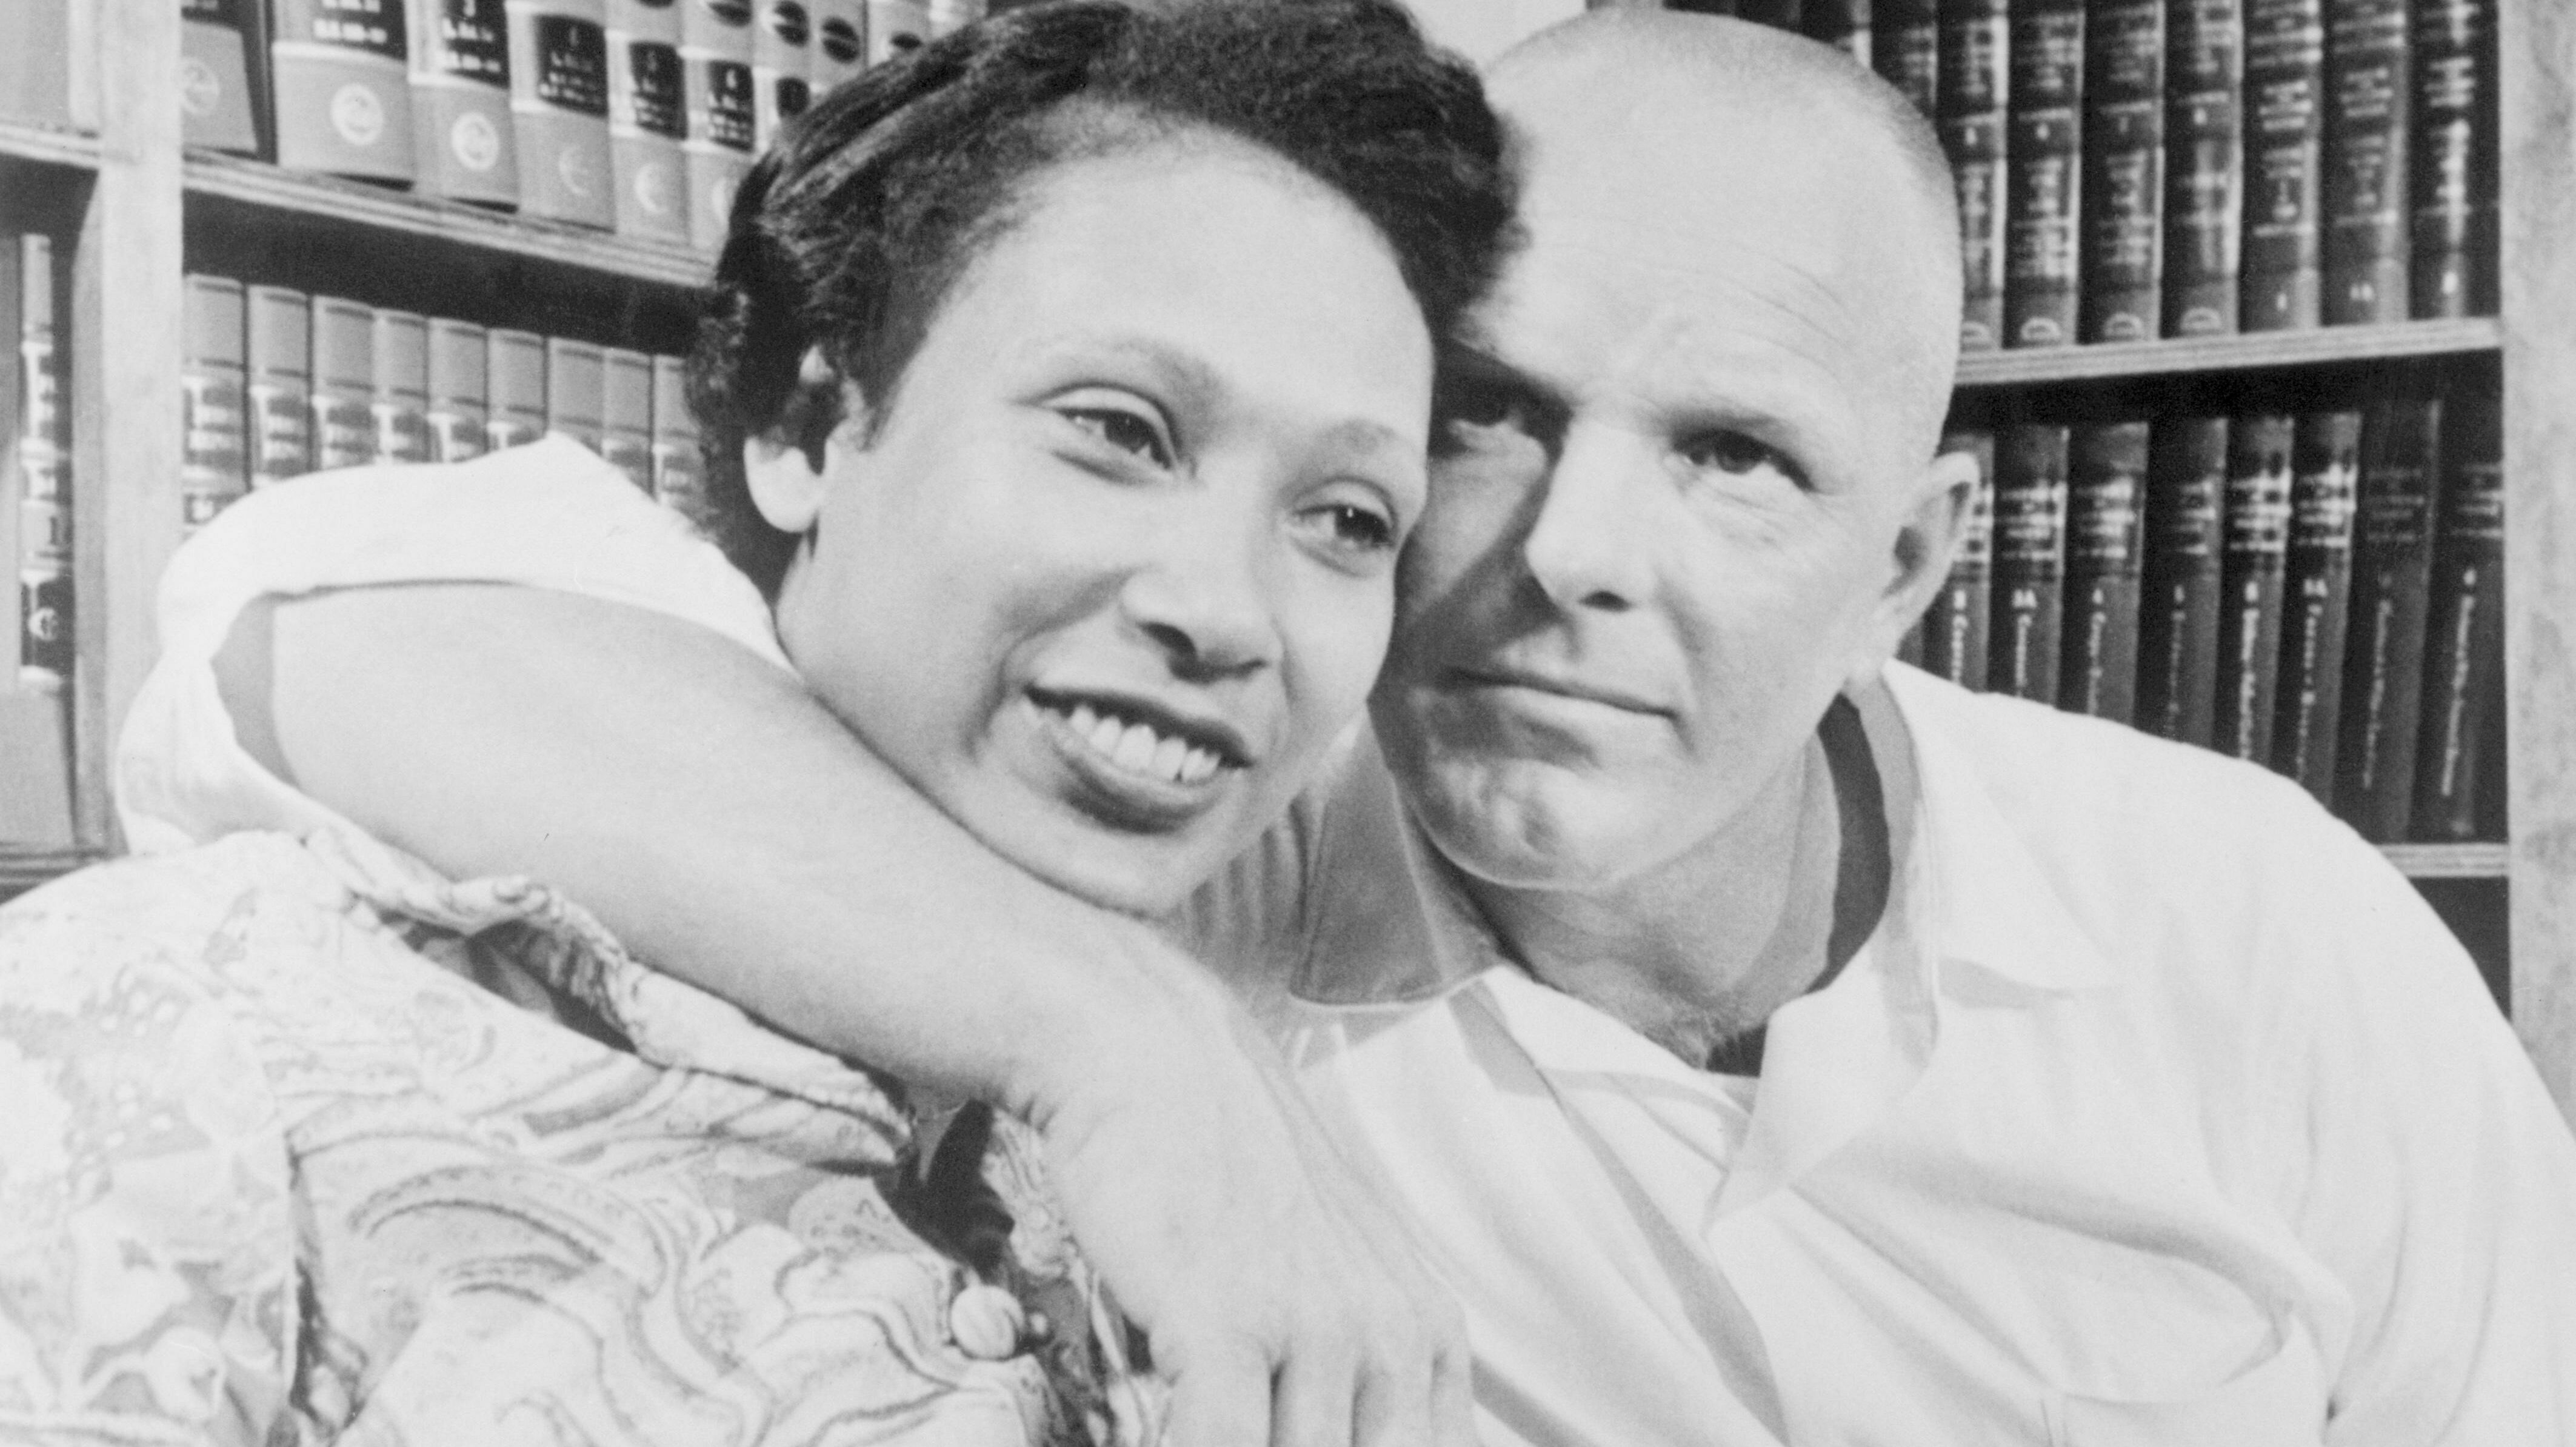 Black And White Interracial Relationship Information